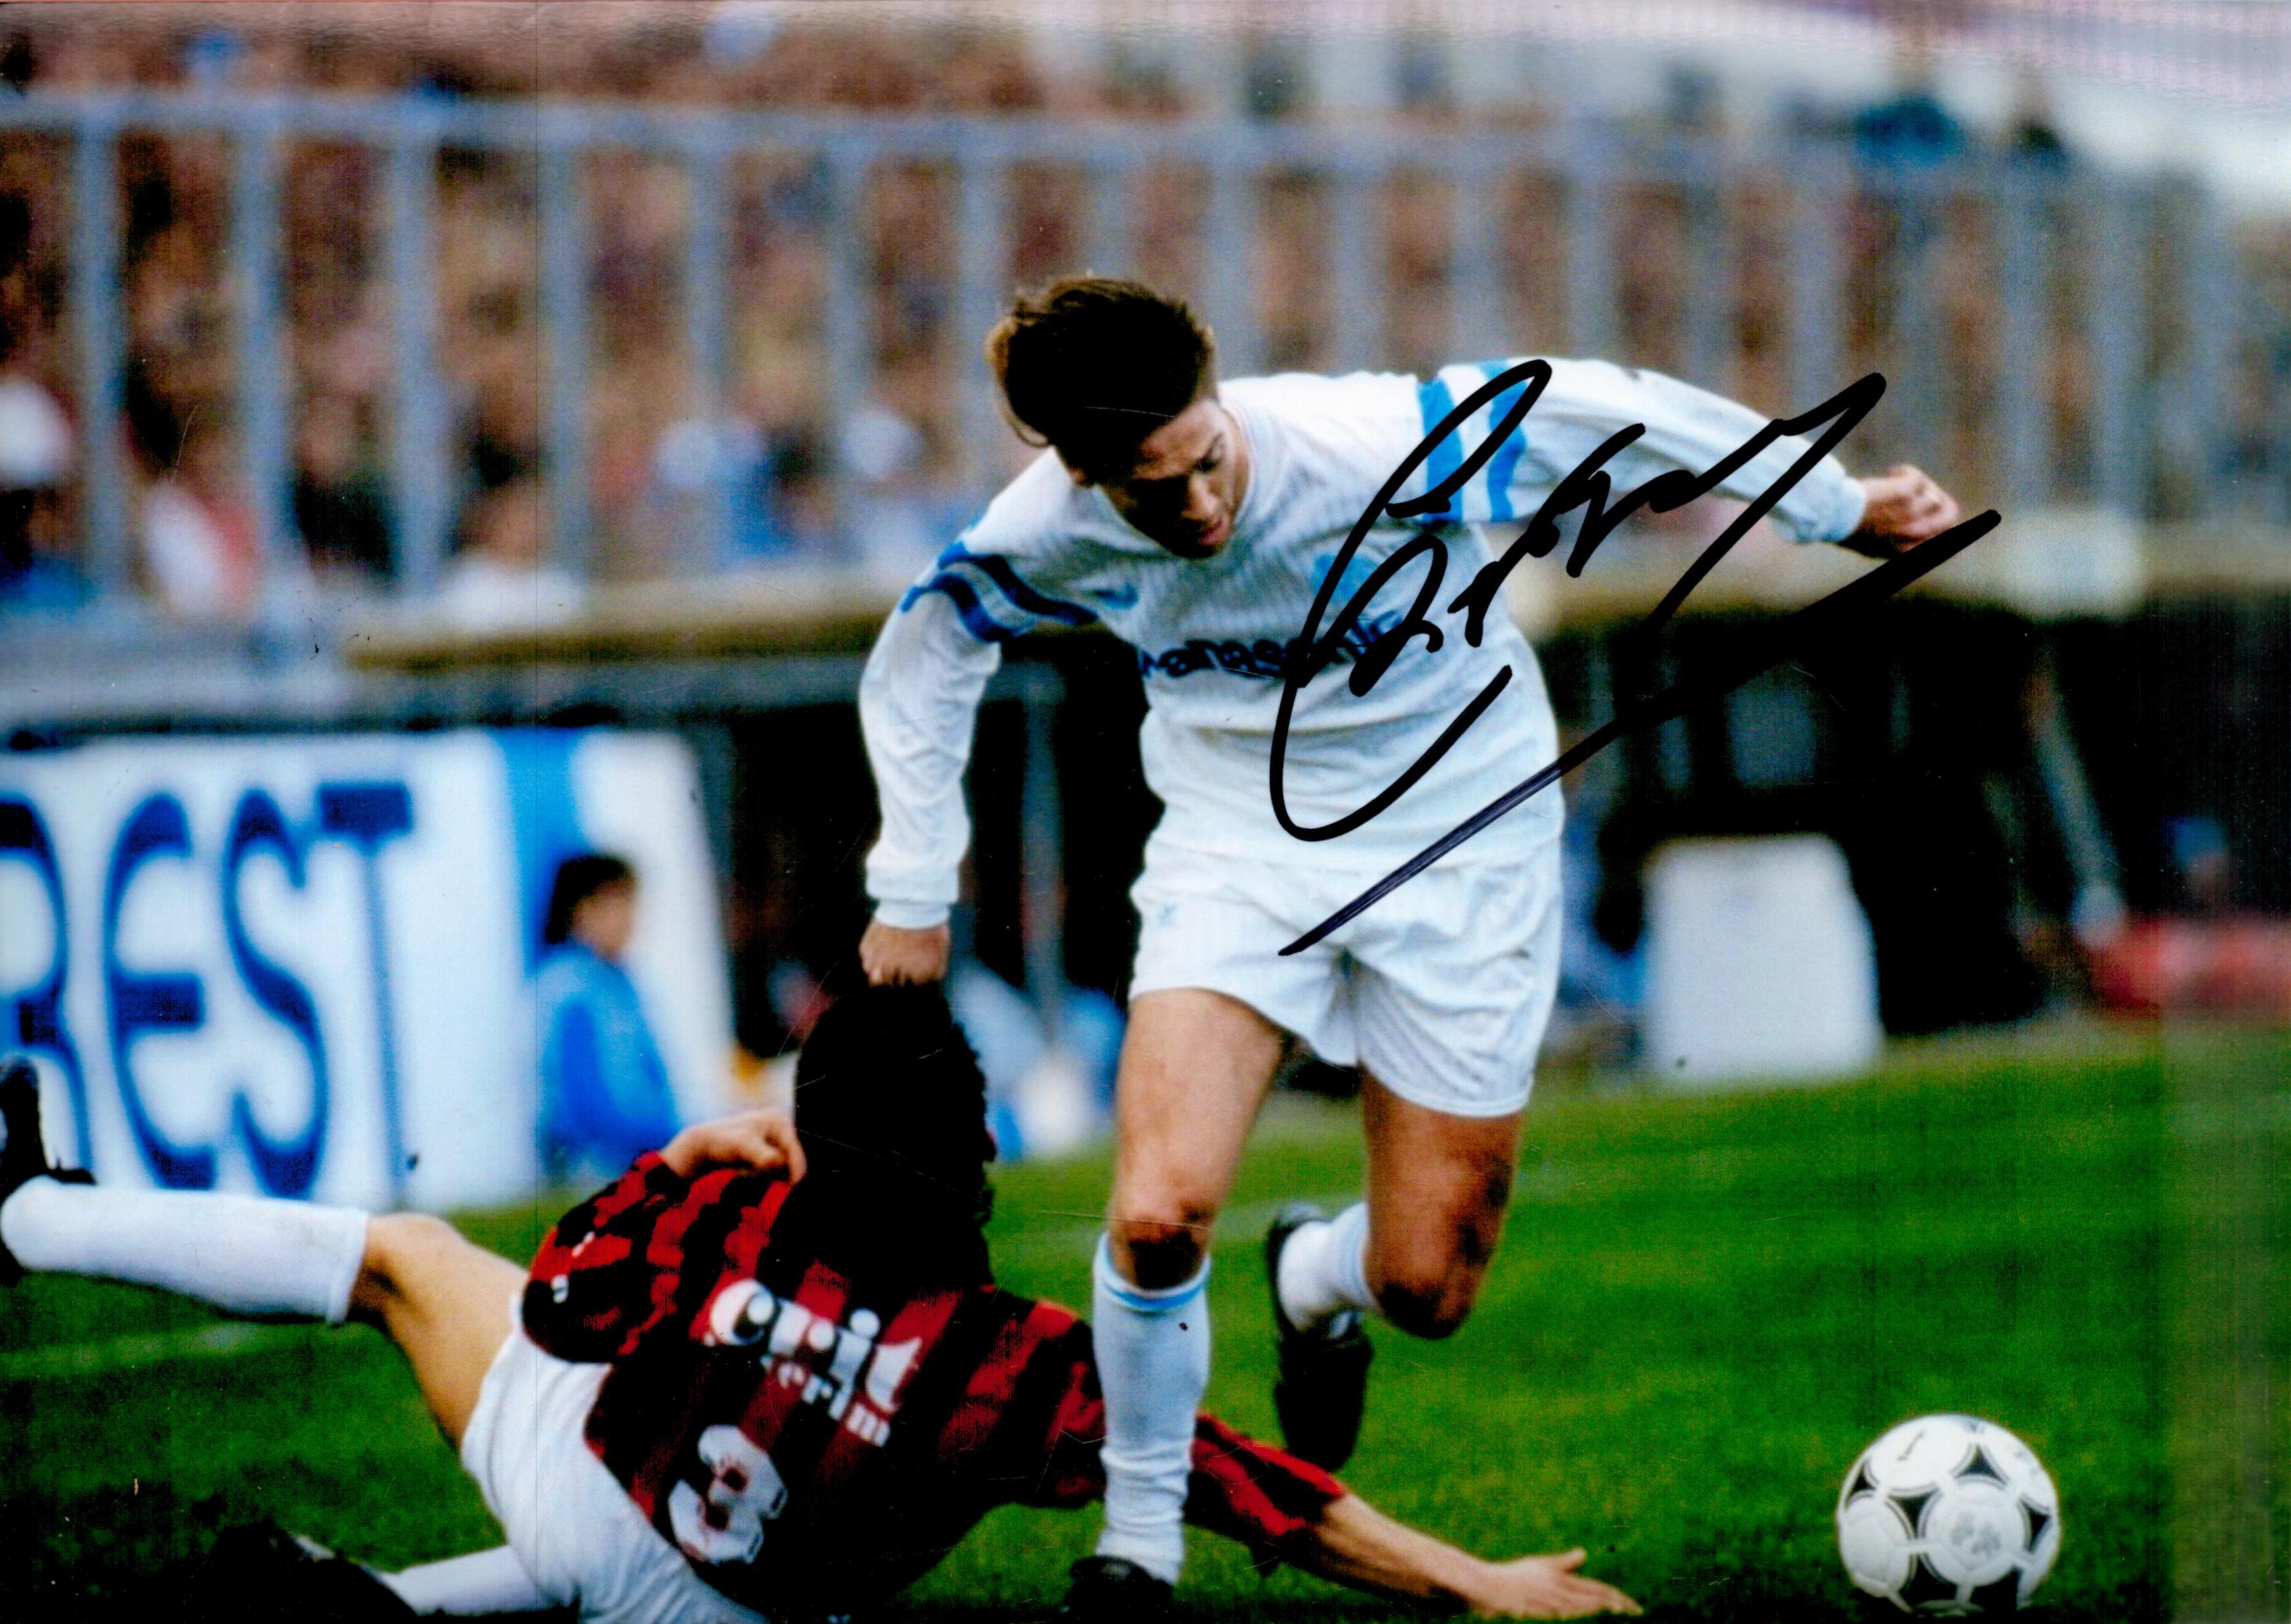 Football Chris Waddle signed Marseille 12x8 colour photo. Good Condition. All autographs come with a